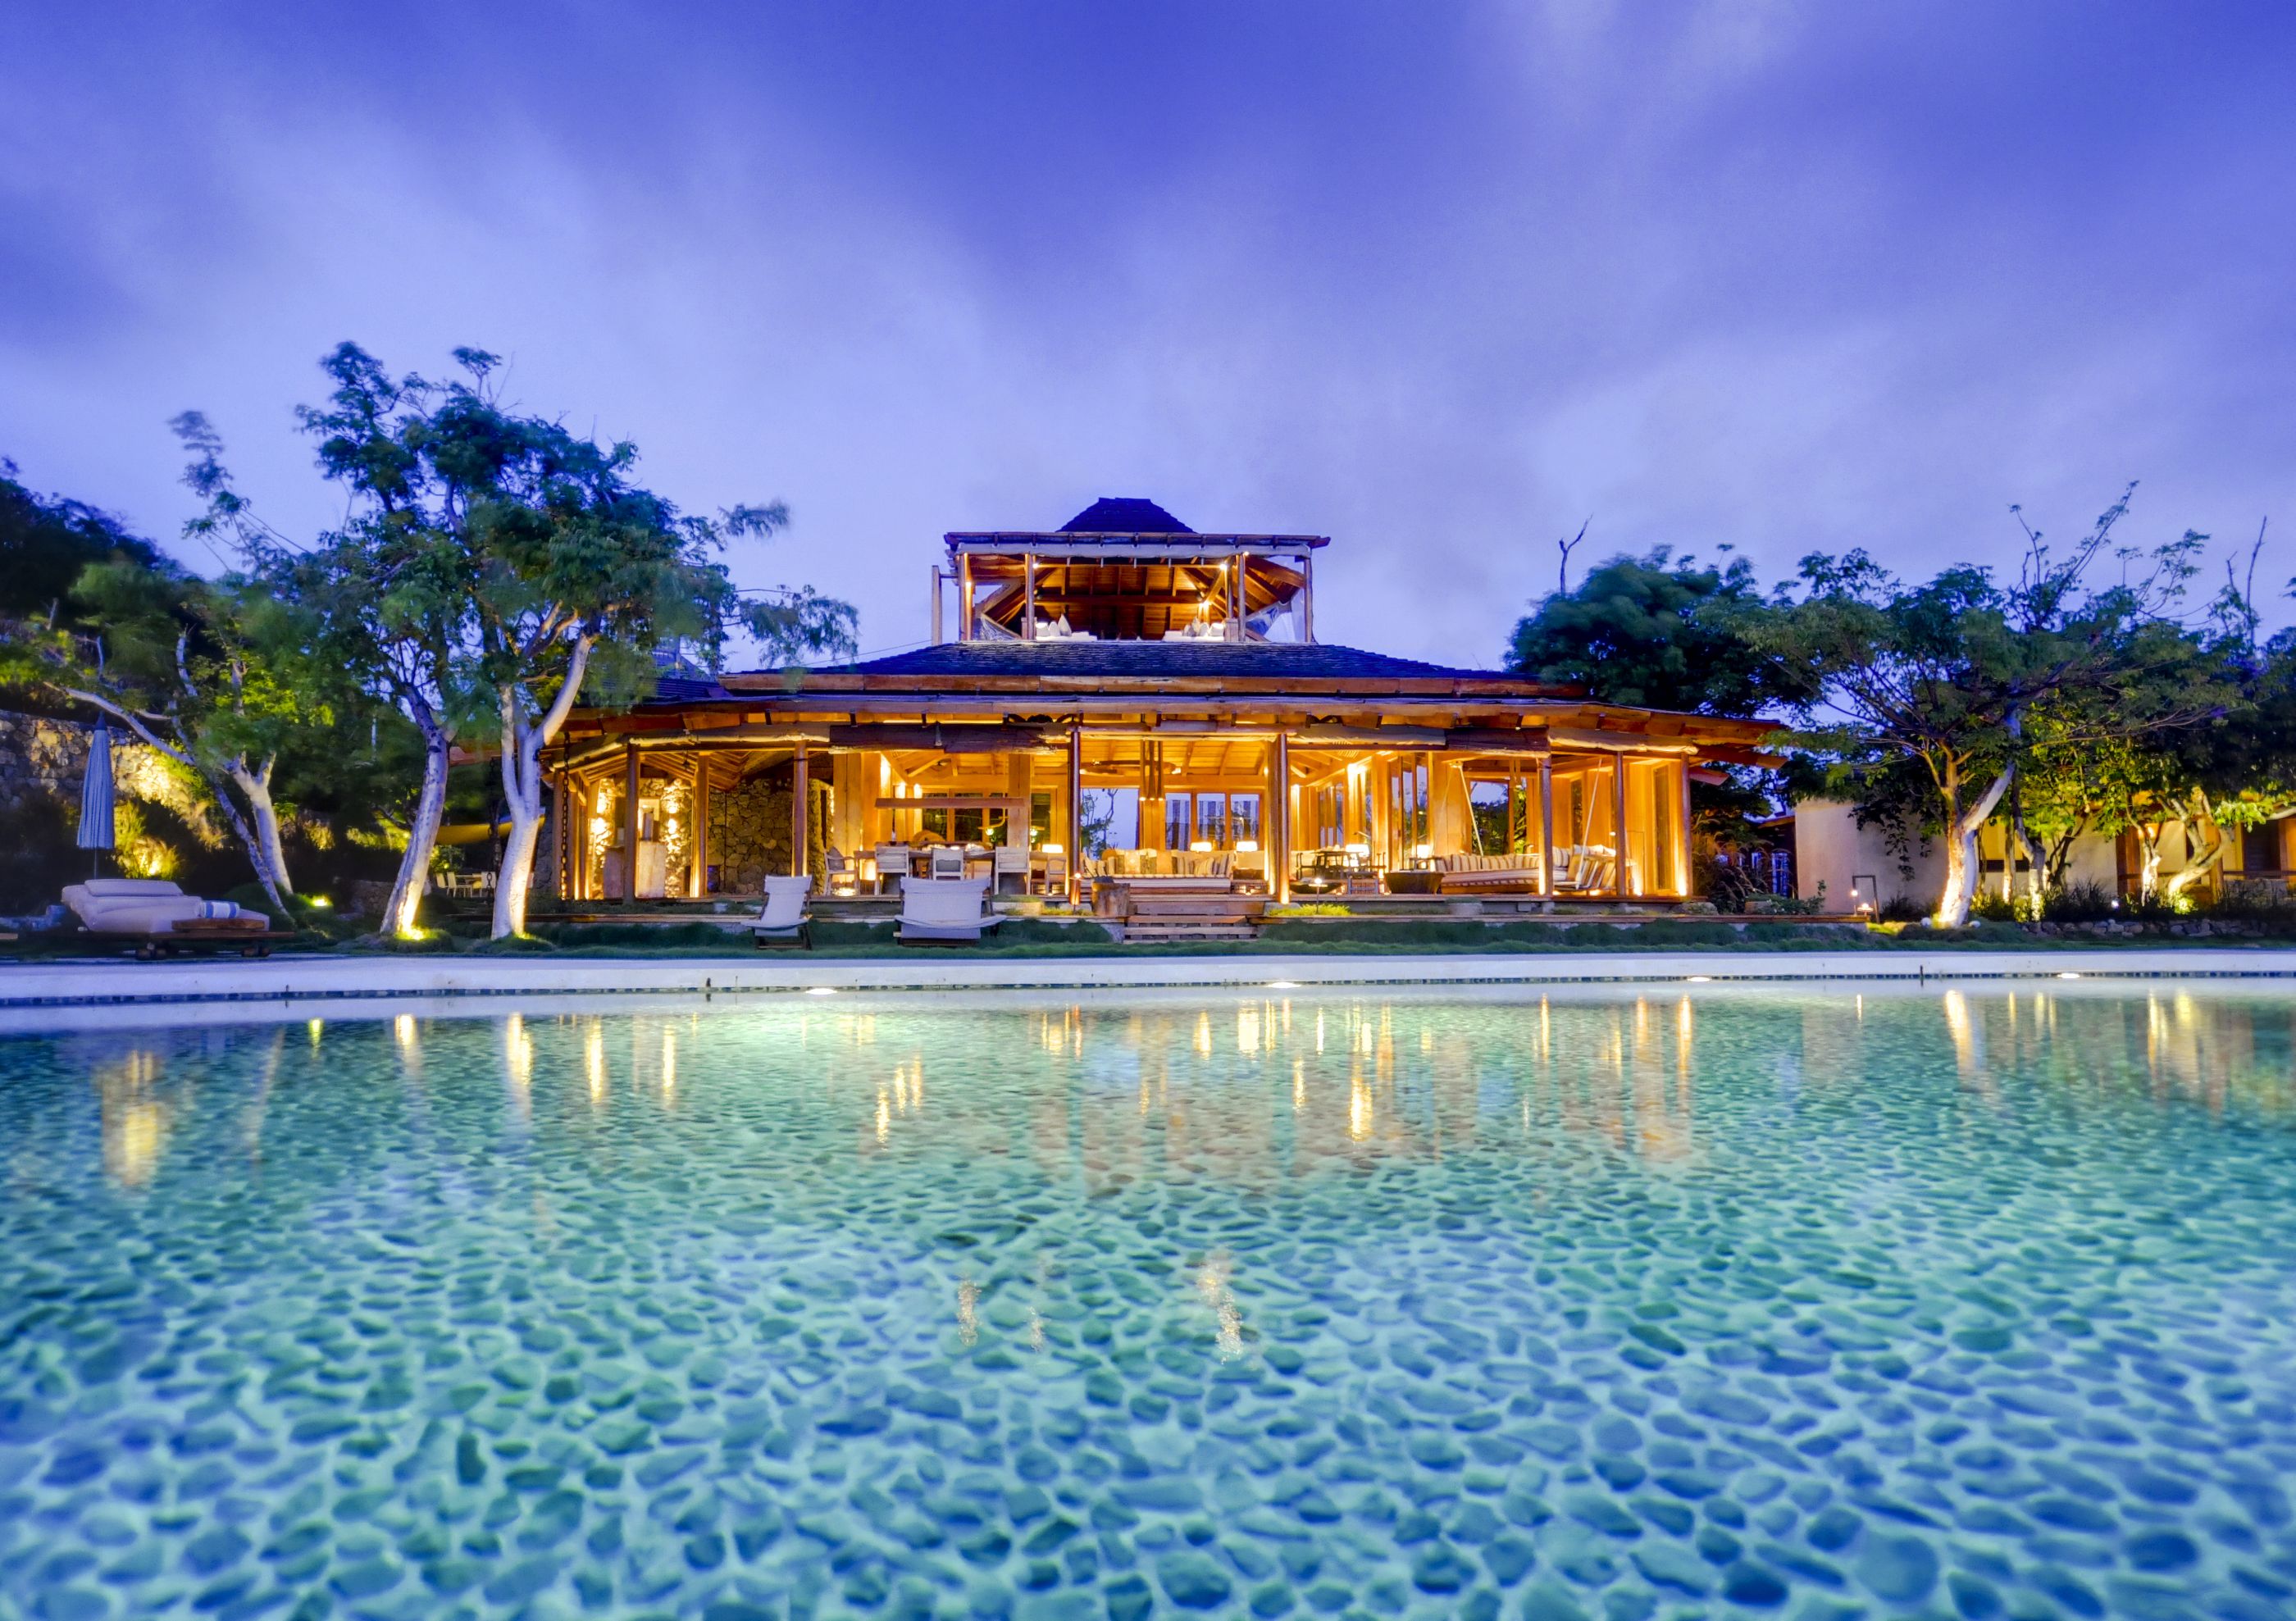 Exteriors and pool of Opium, Mustique